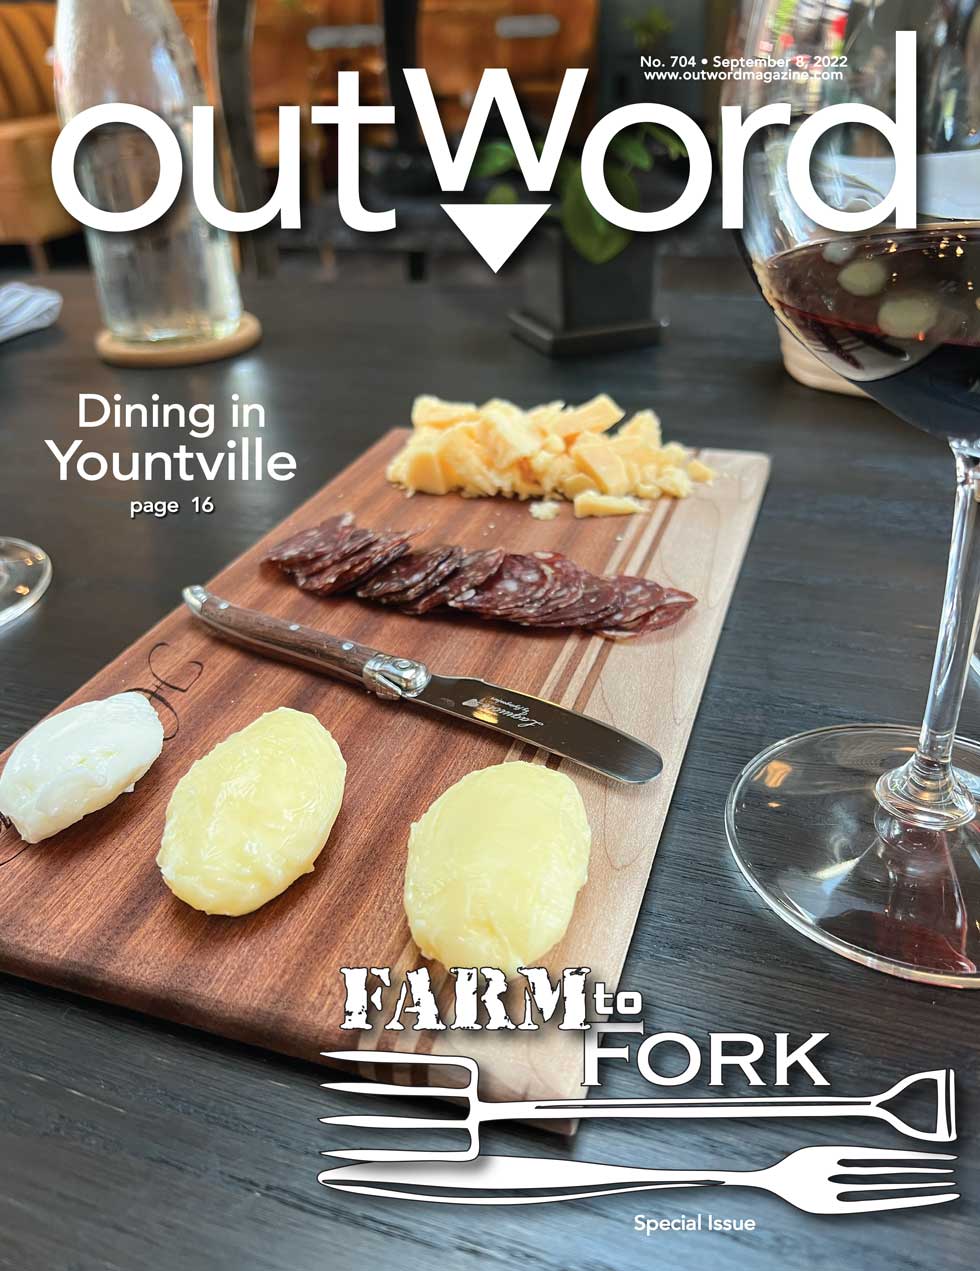 September 8, 2022 | Outword’s Annual Farm to Fork Issue is Out Now!